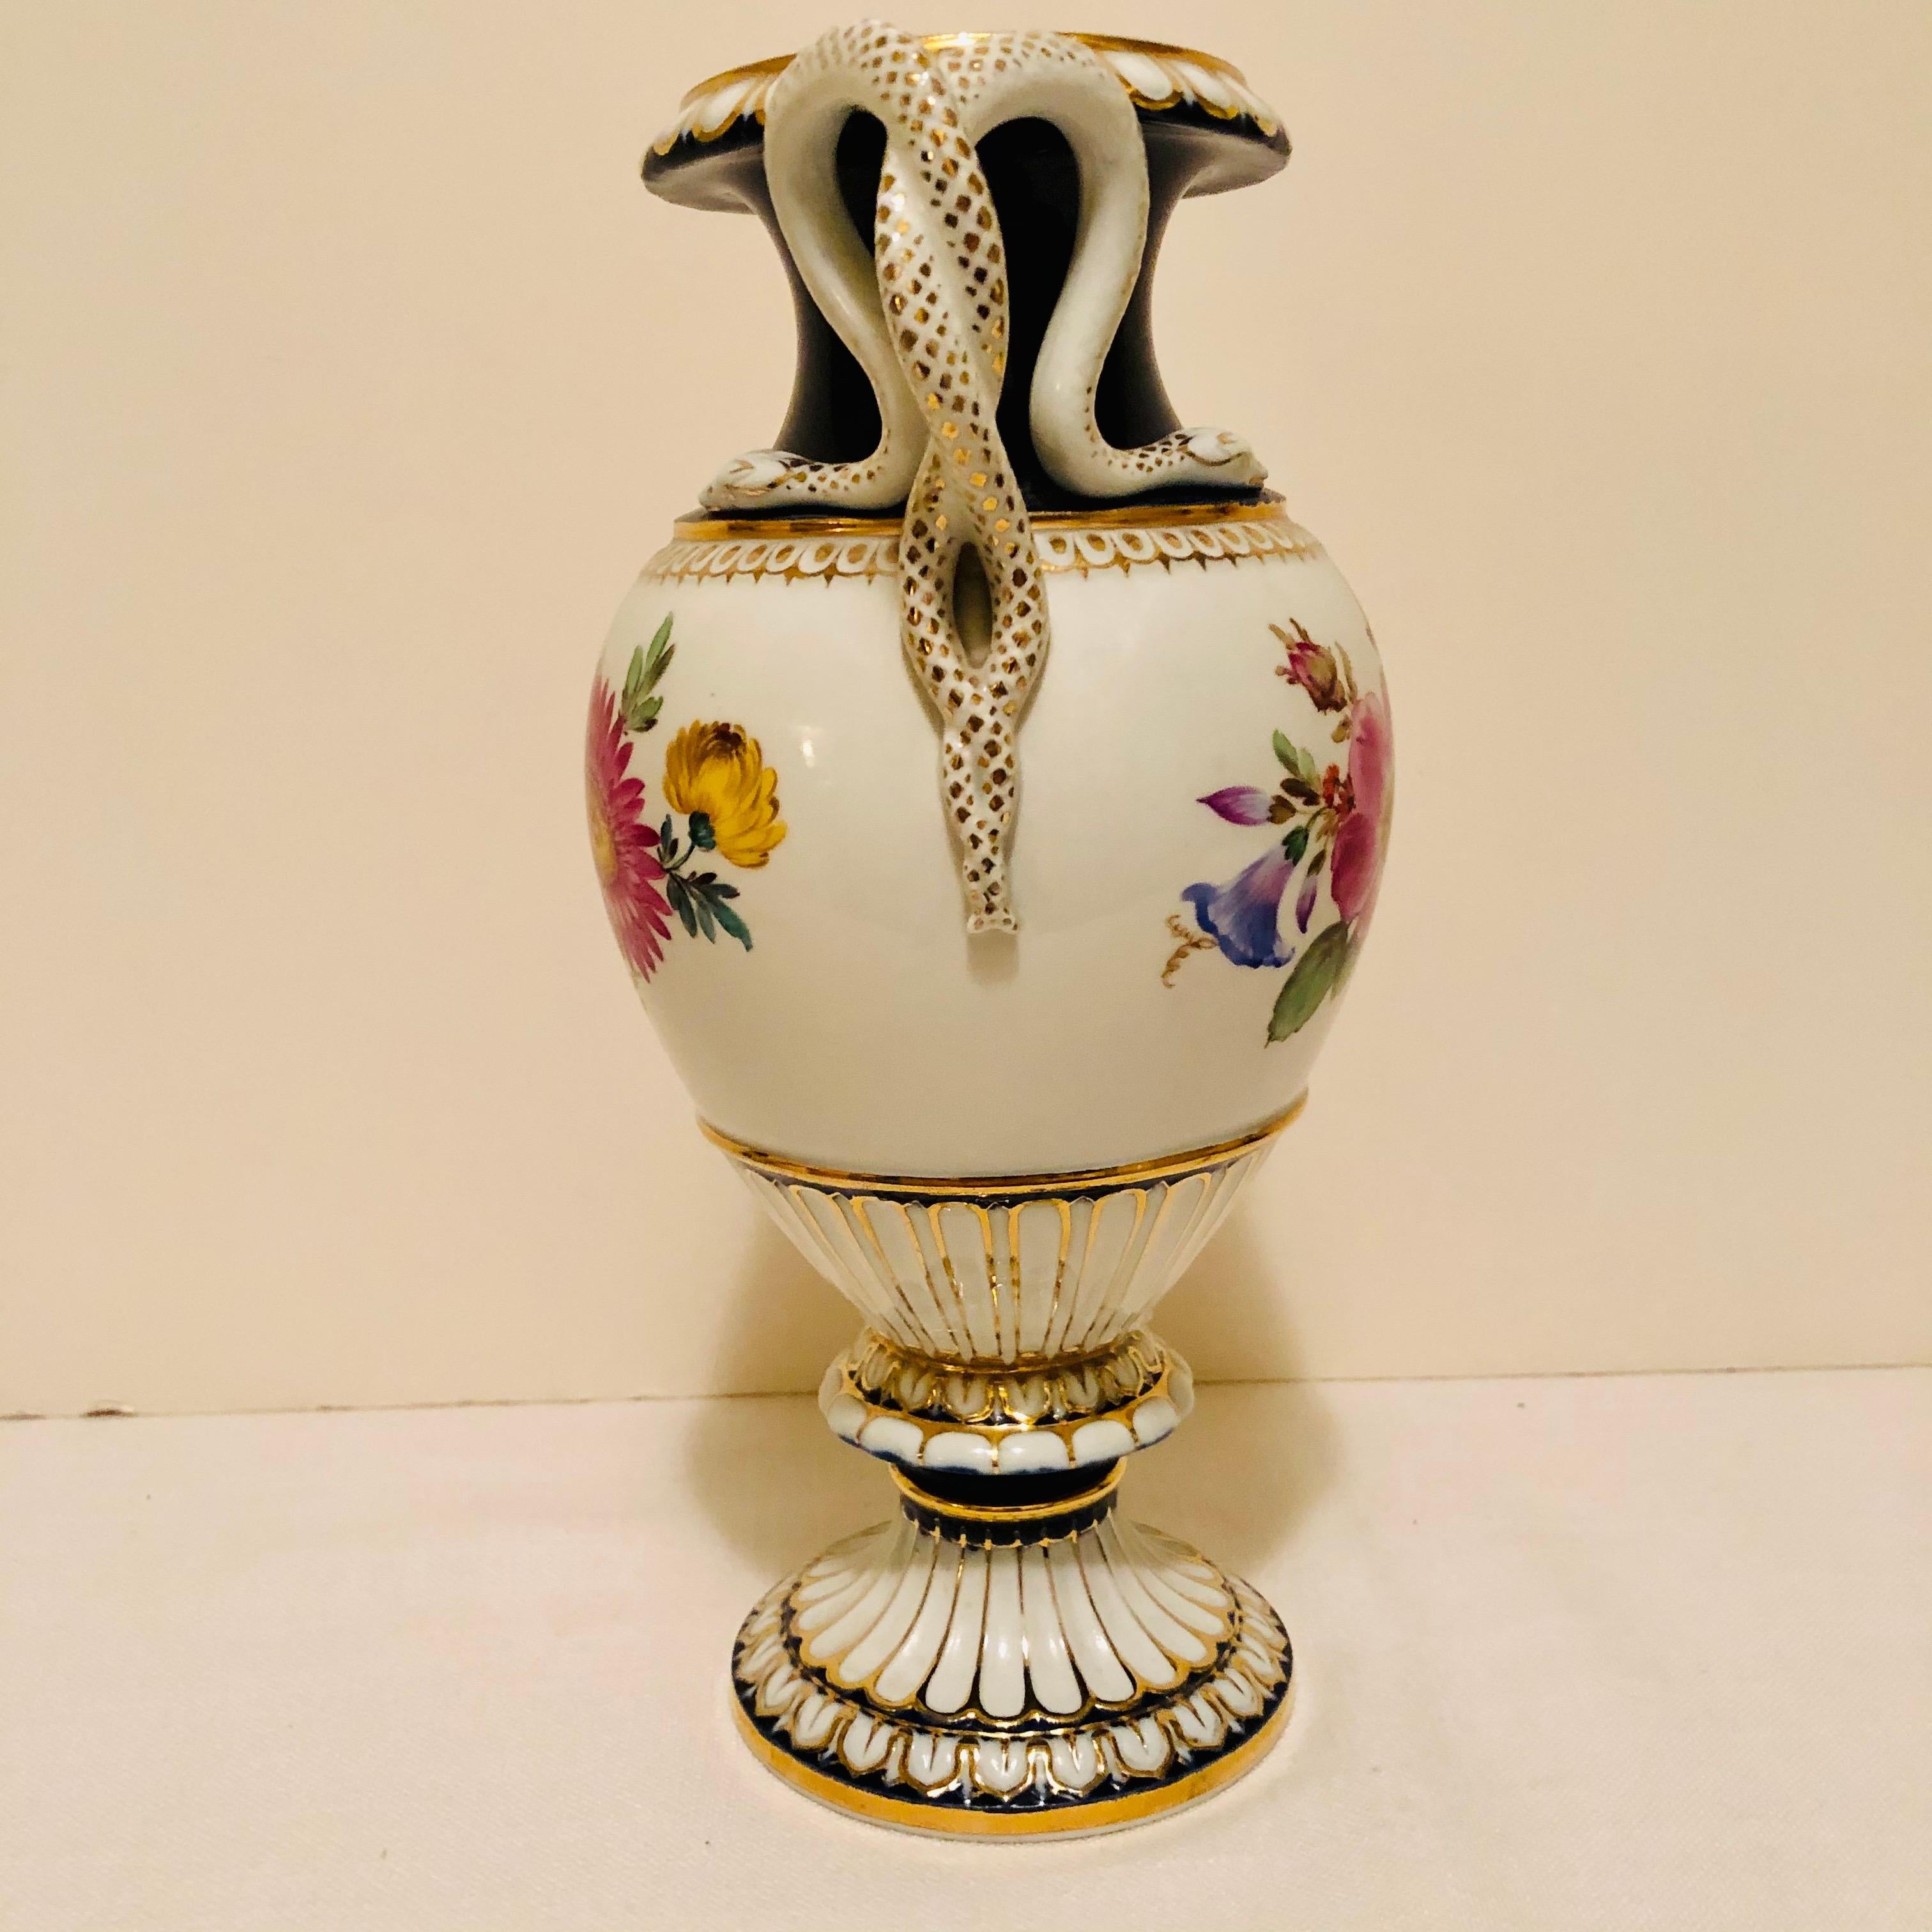 German Meissen Vase with Different Flower Bouquets on Either Side and Snake Handles